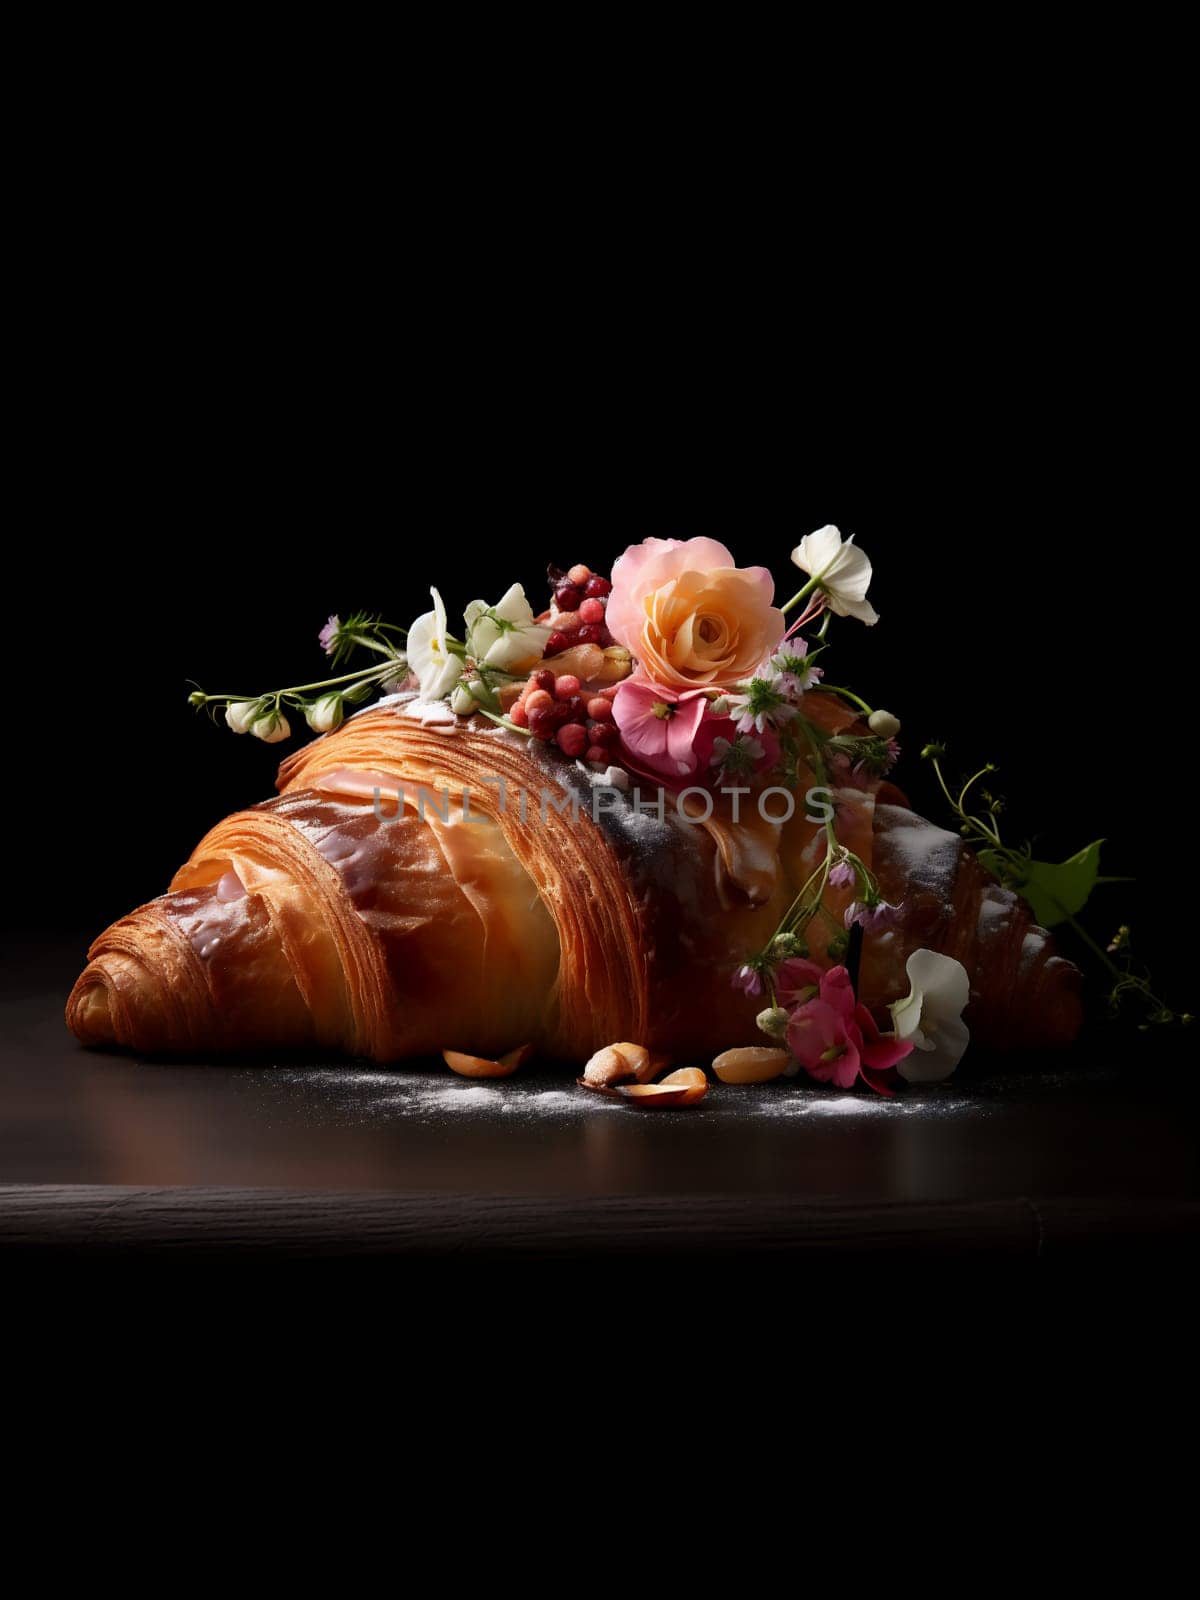 Delicious croissant with beautiful flowers on black background by IrynaMelnyk